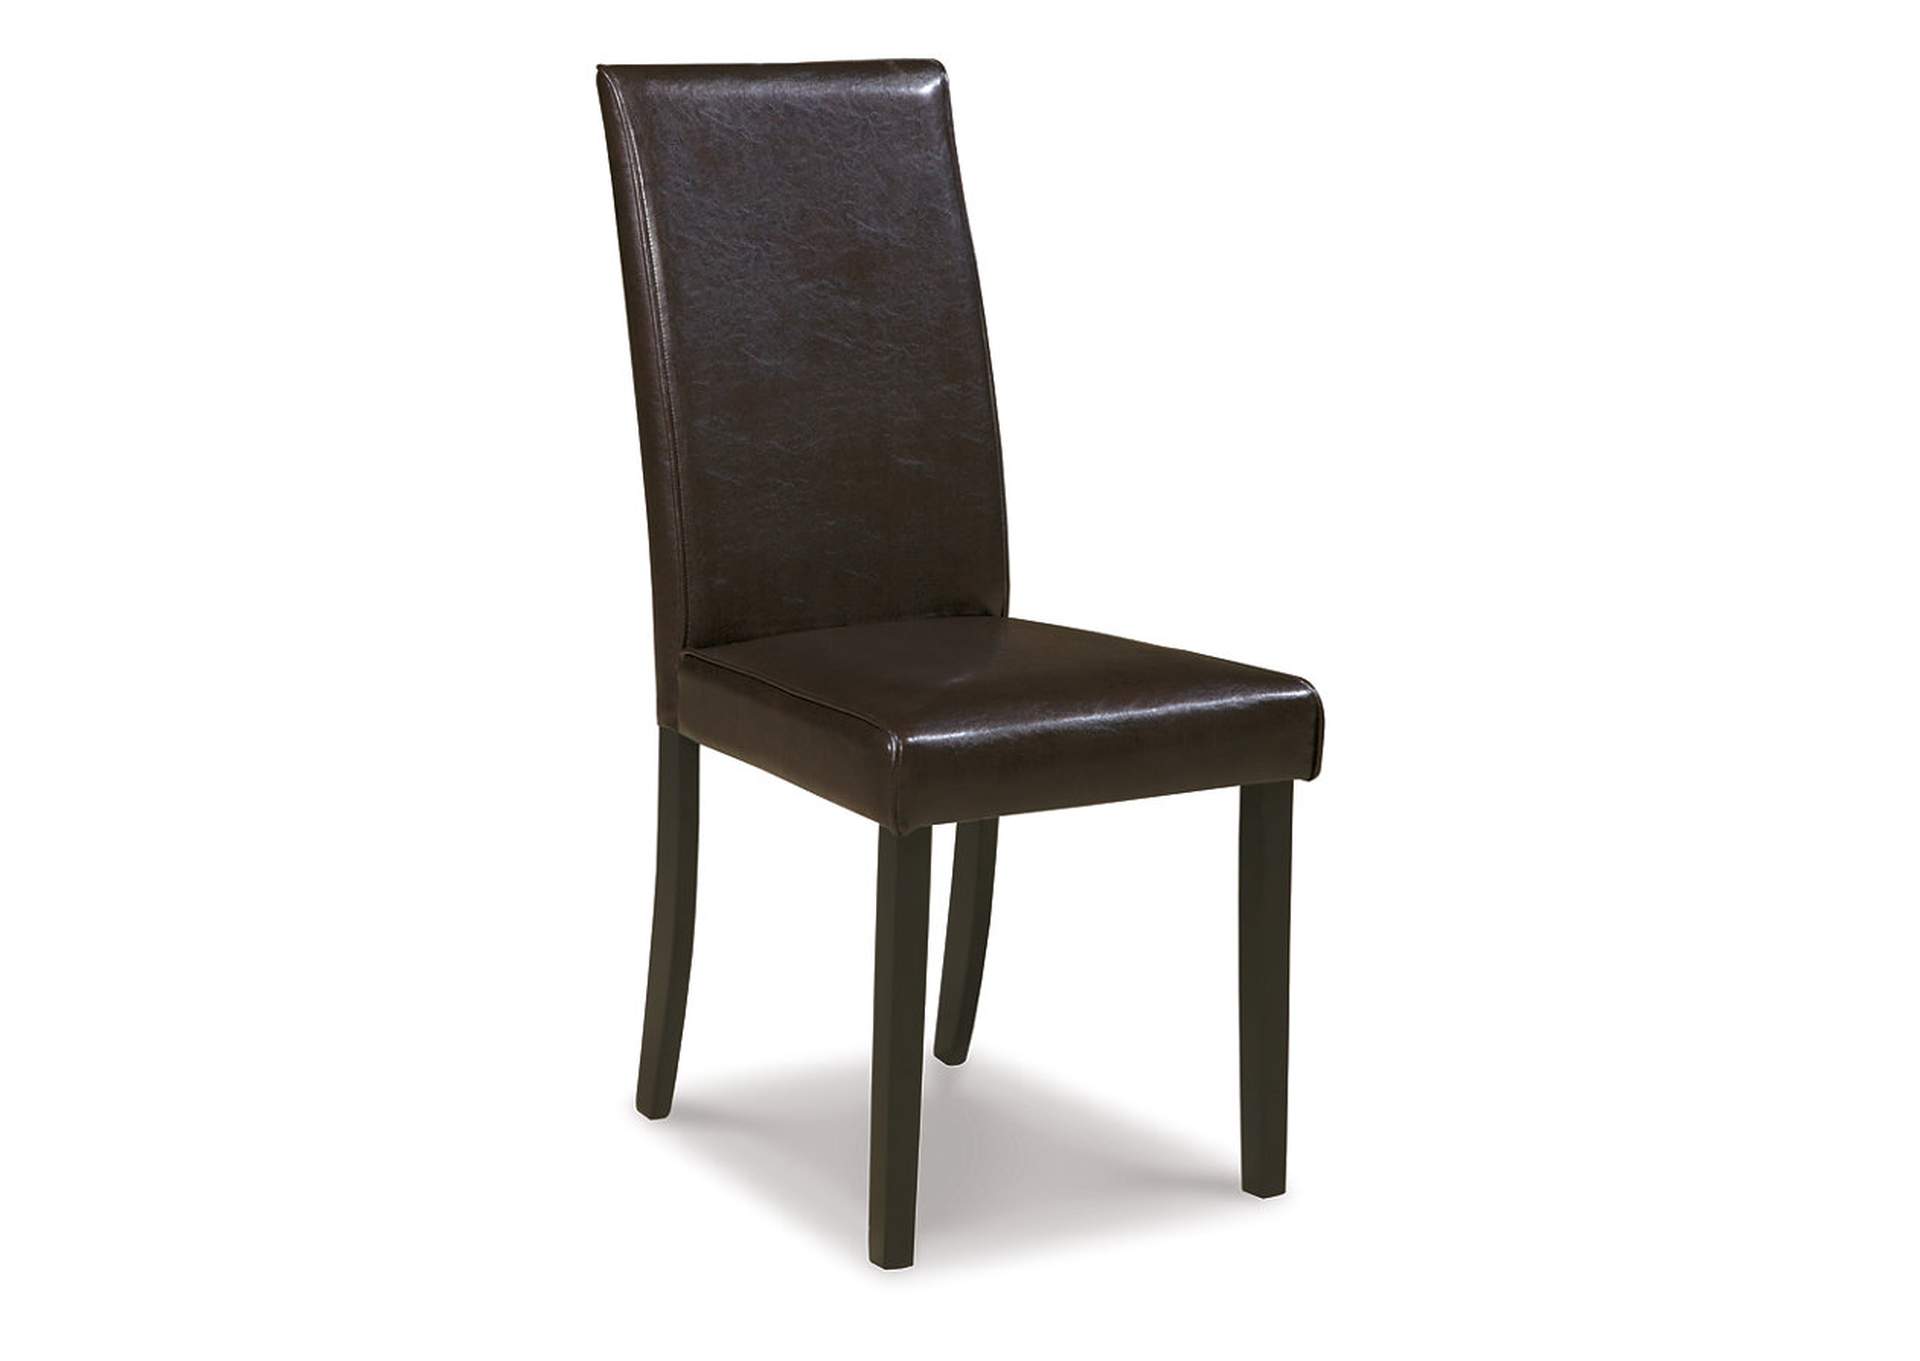 Kimonte Dining Room Chair (Set of 2)